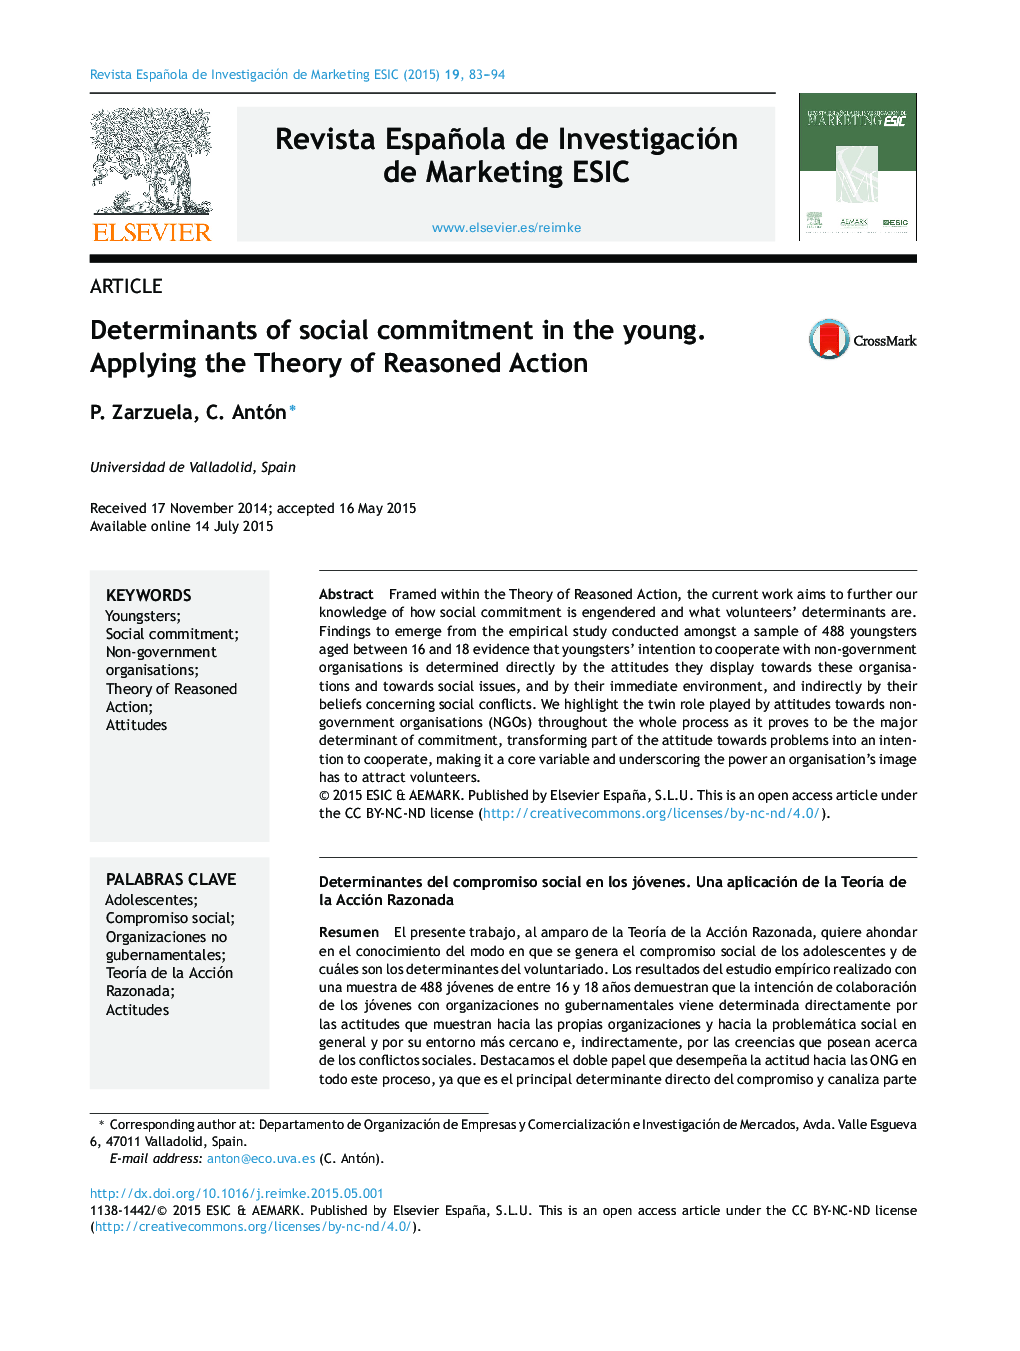 Determinants of social commitment in the young. Applying the Theory of Reasoned Action